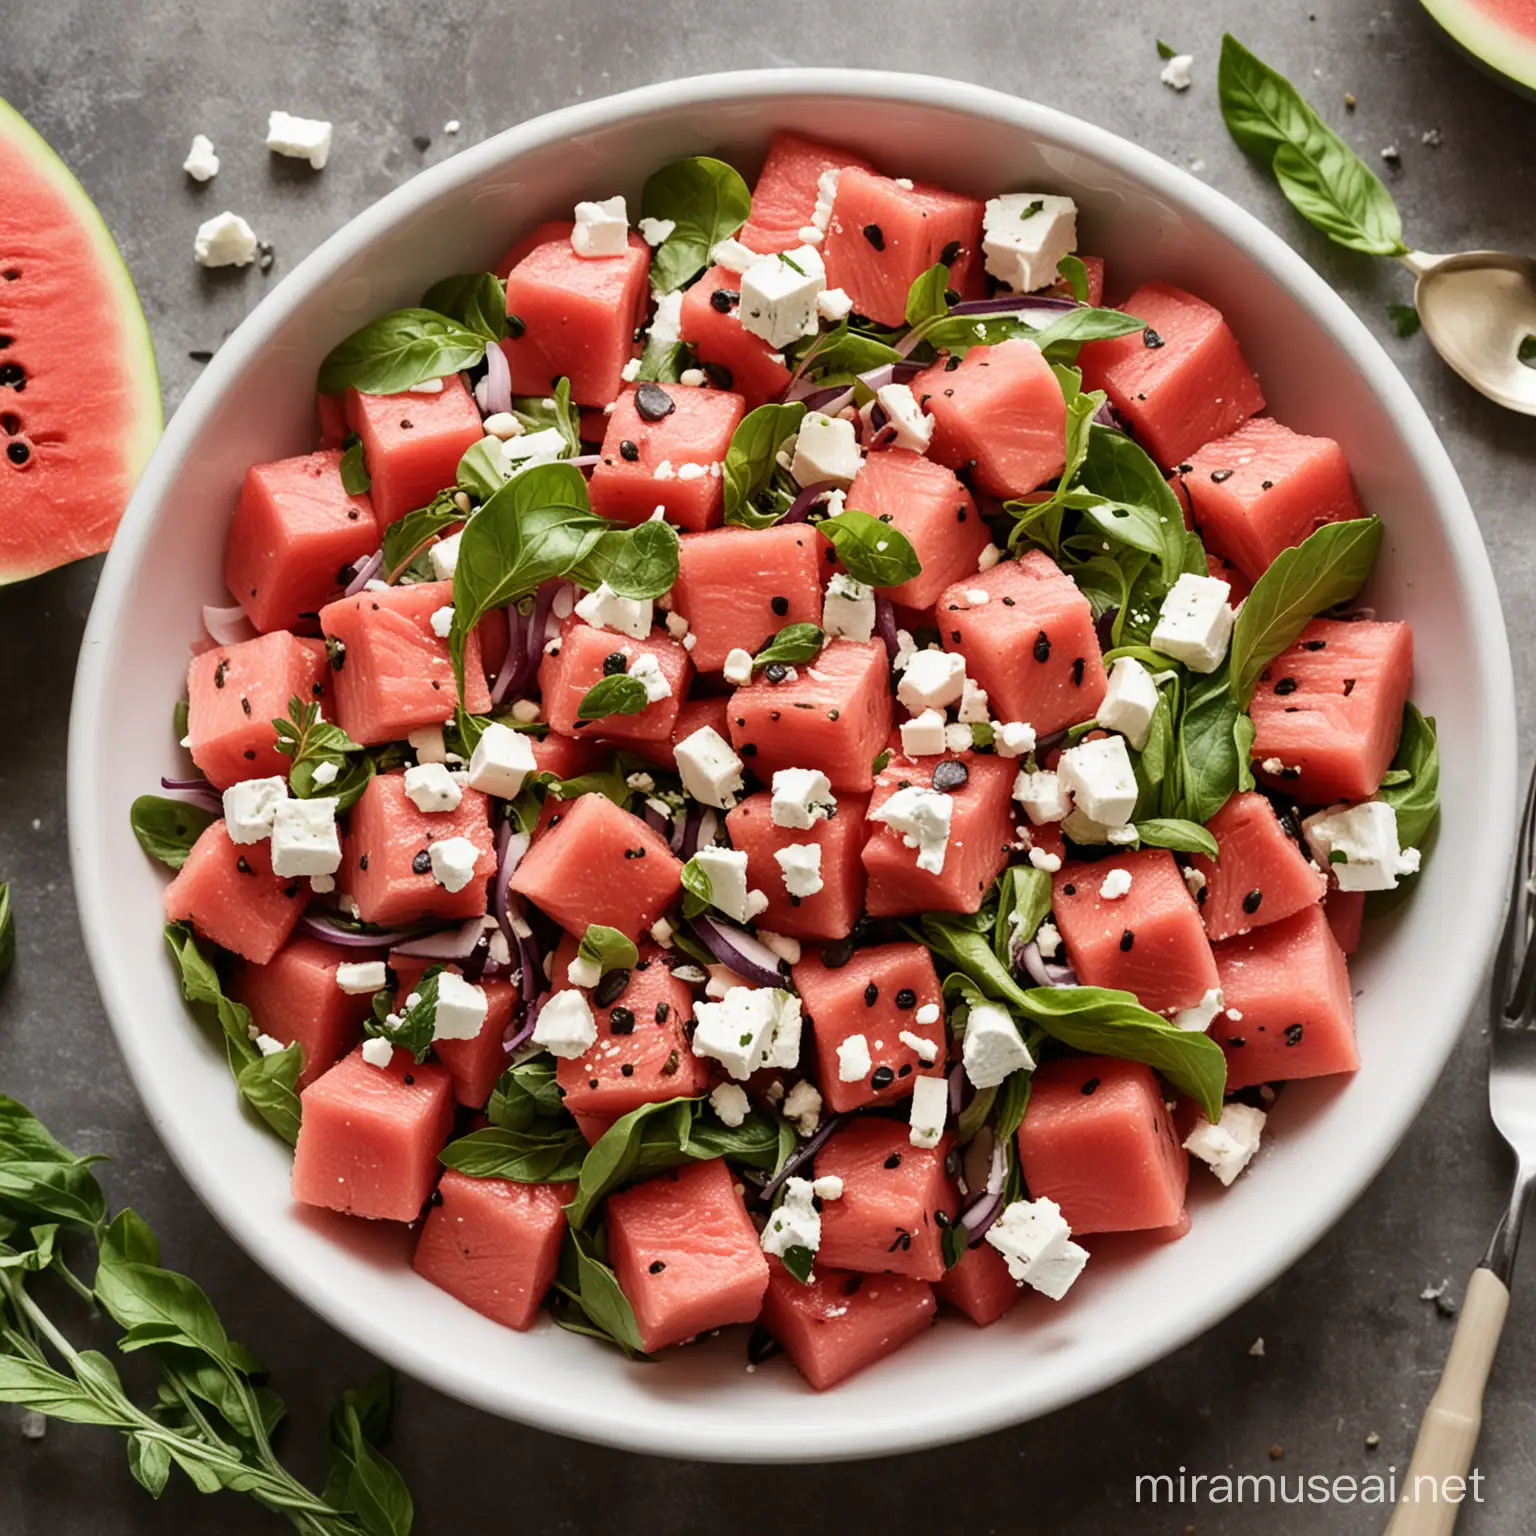 Refreshing Watermelon Feta Salad with Mint Leaves